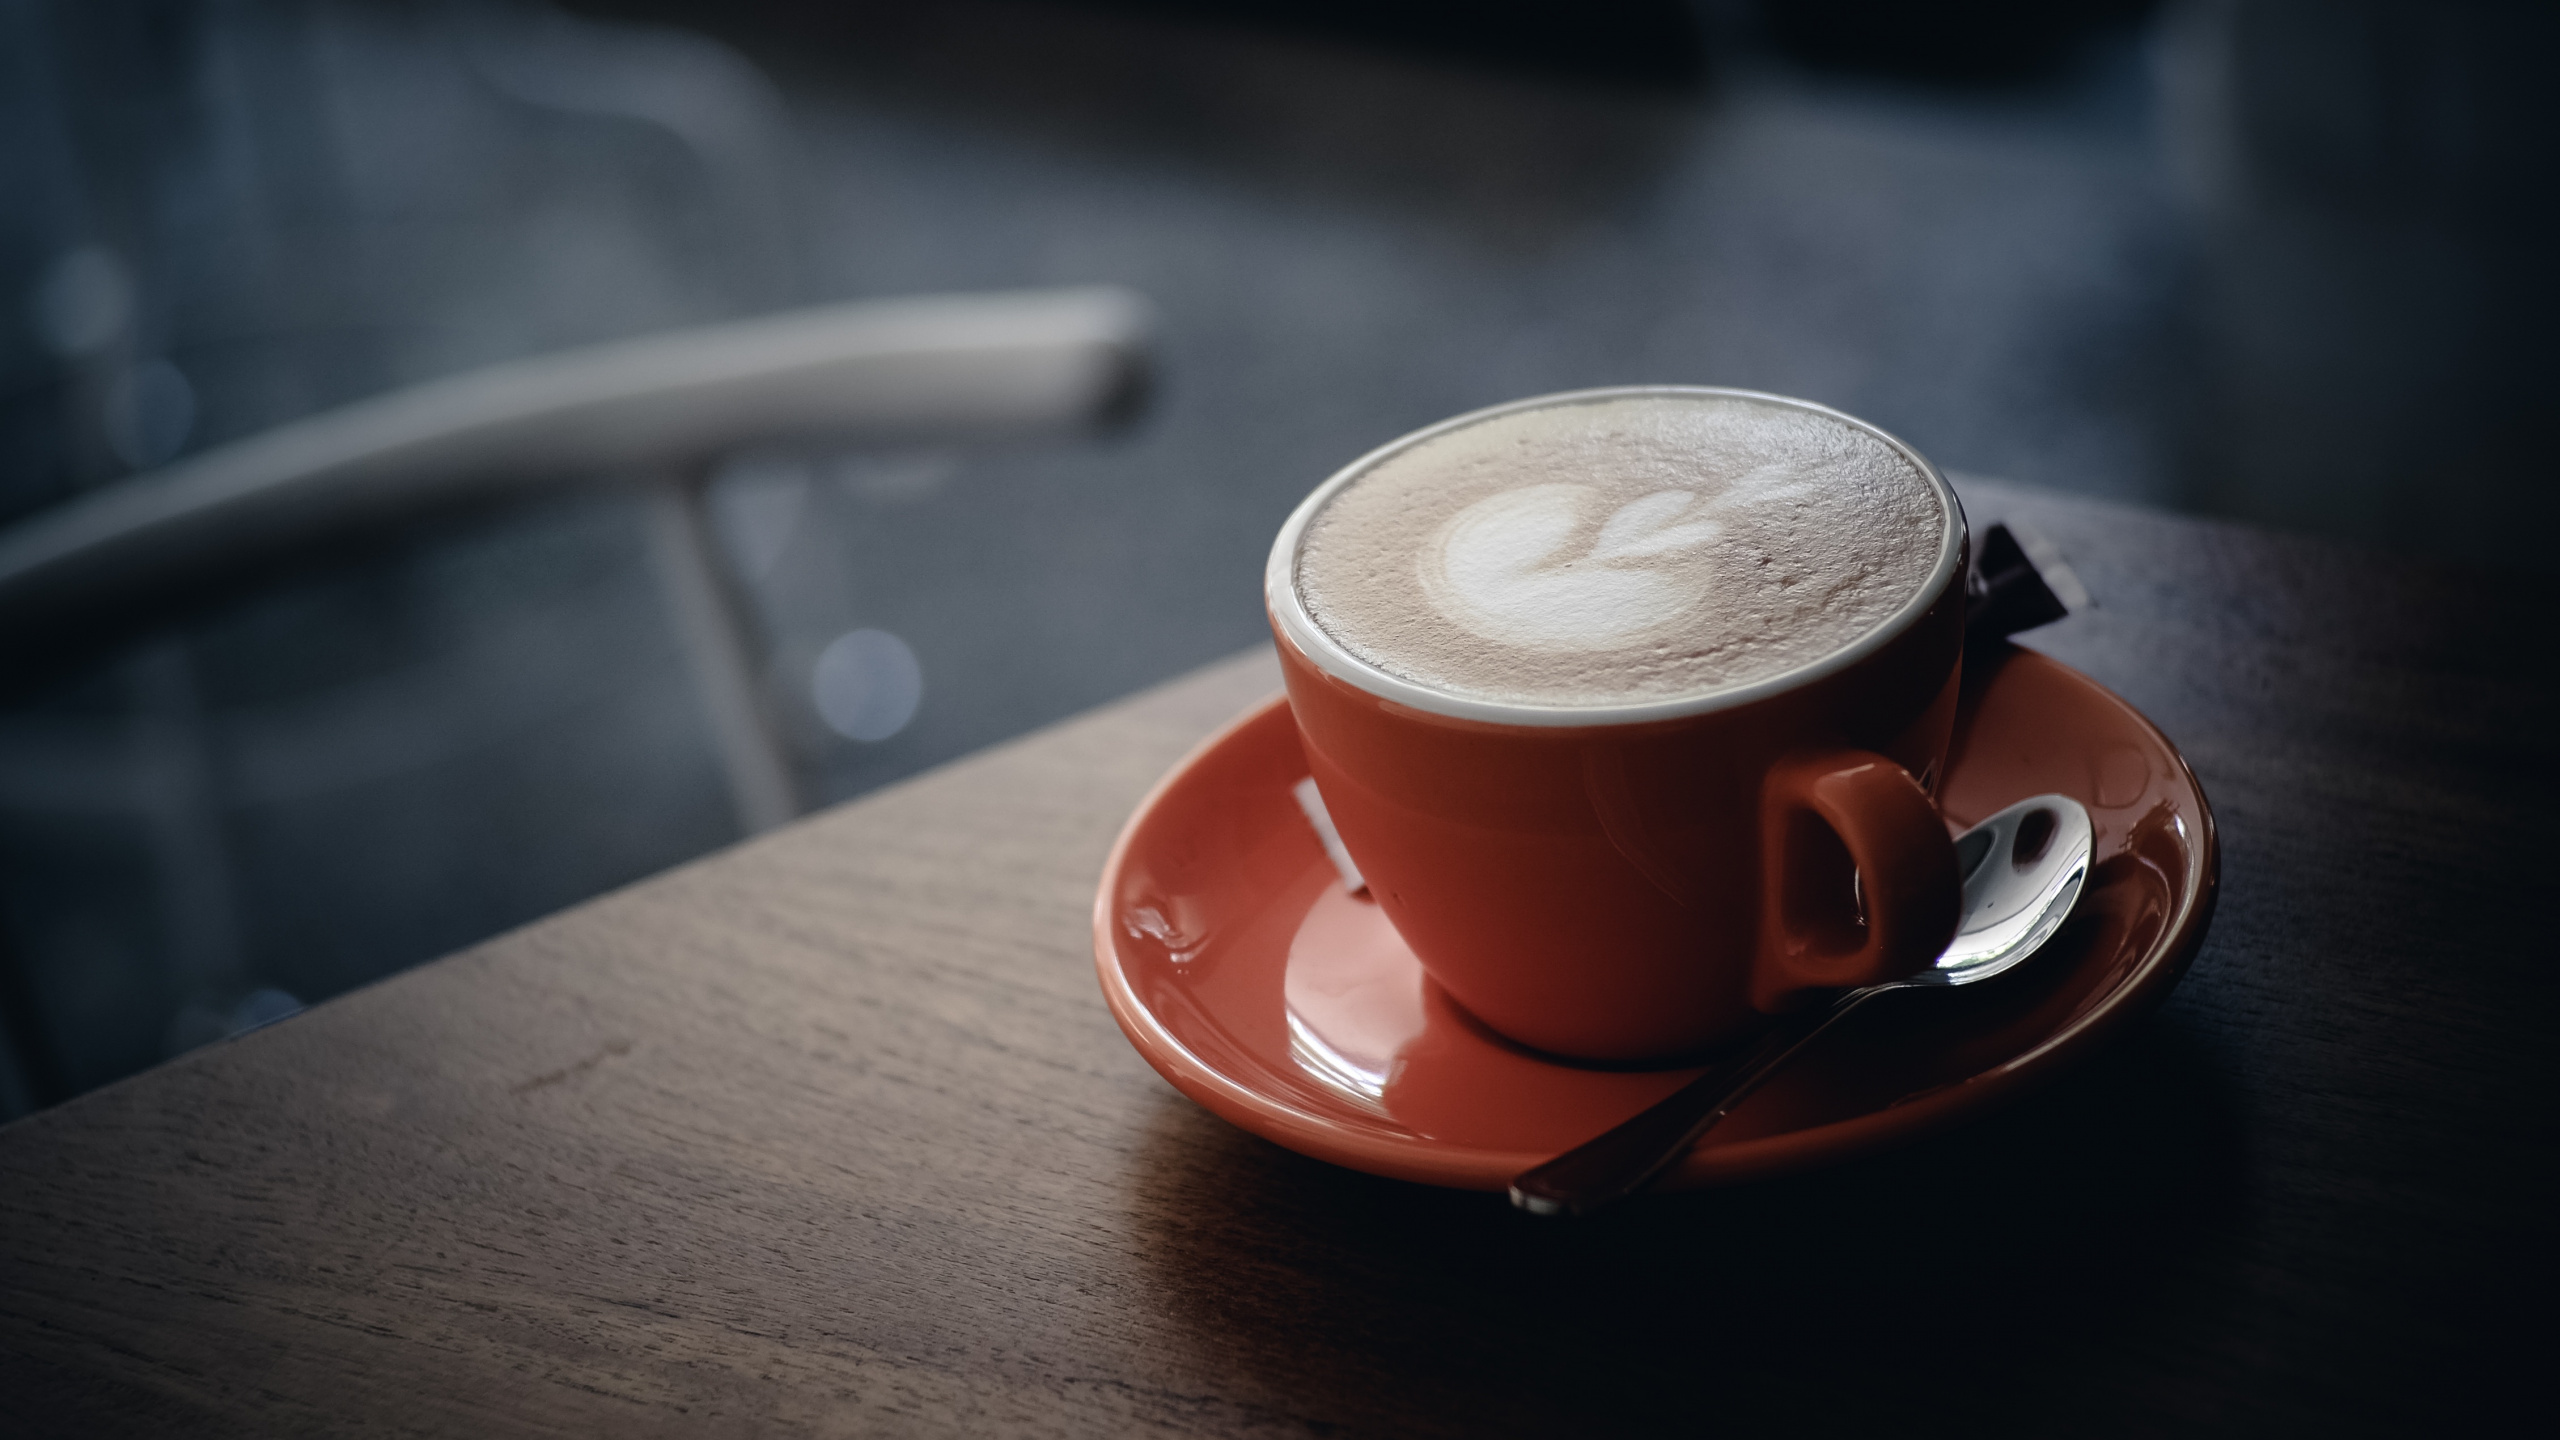 Red Ceramic Mug With Coffee on Orange Saucer. Wallpaper in 2560x1440 Resolution